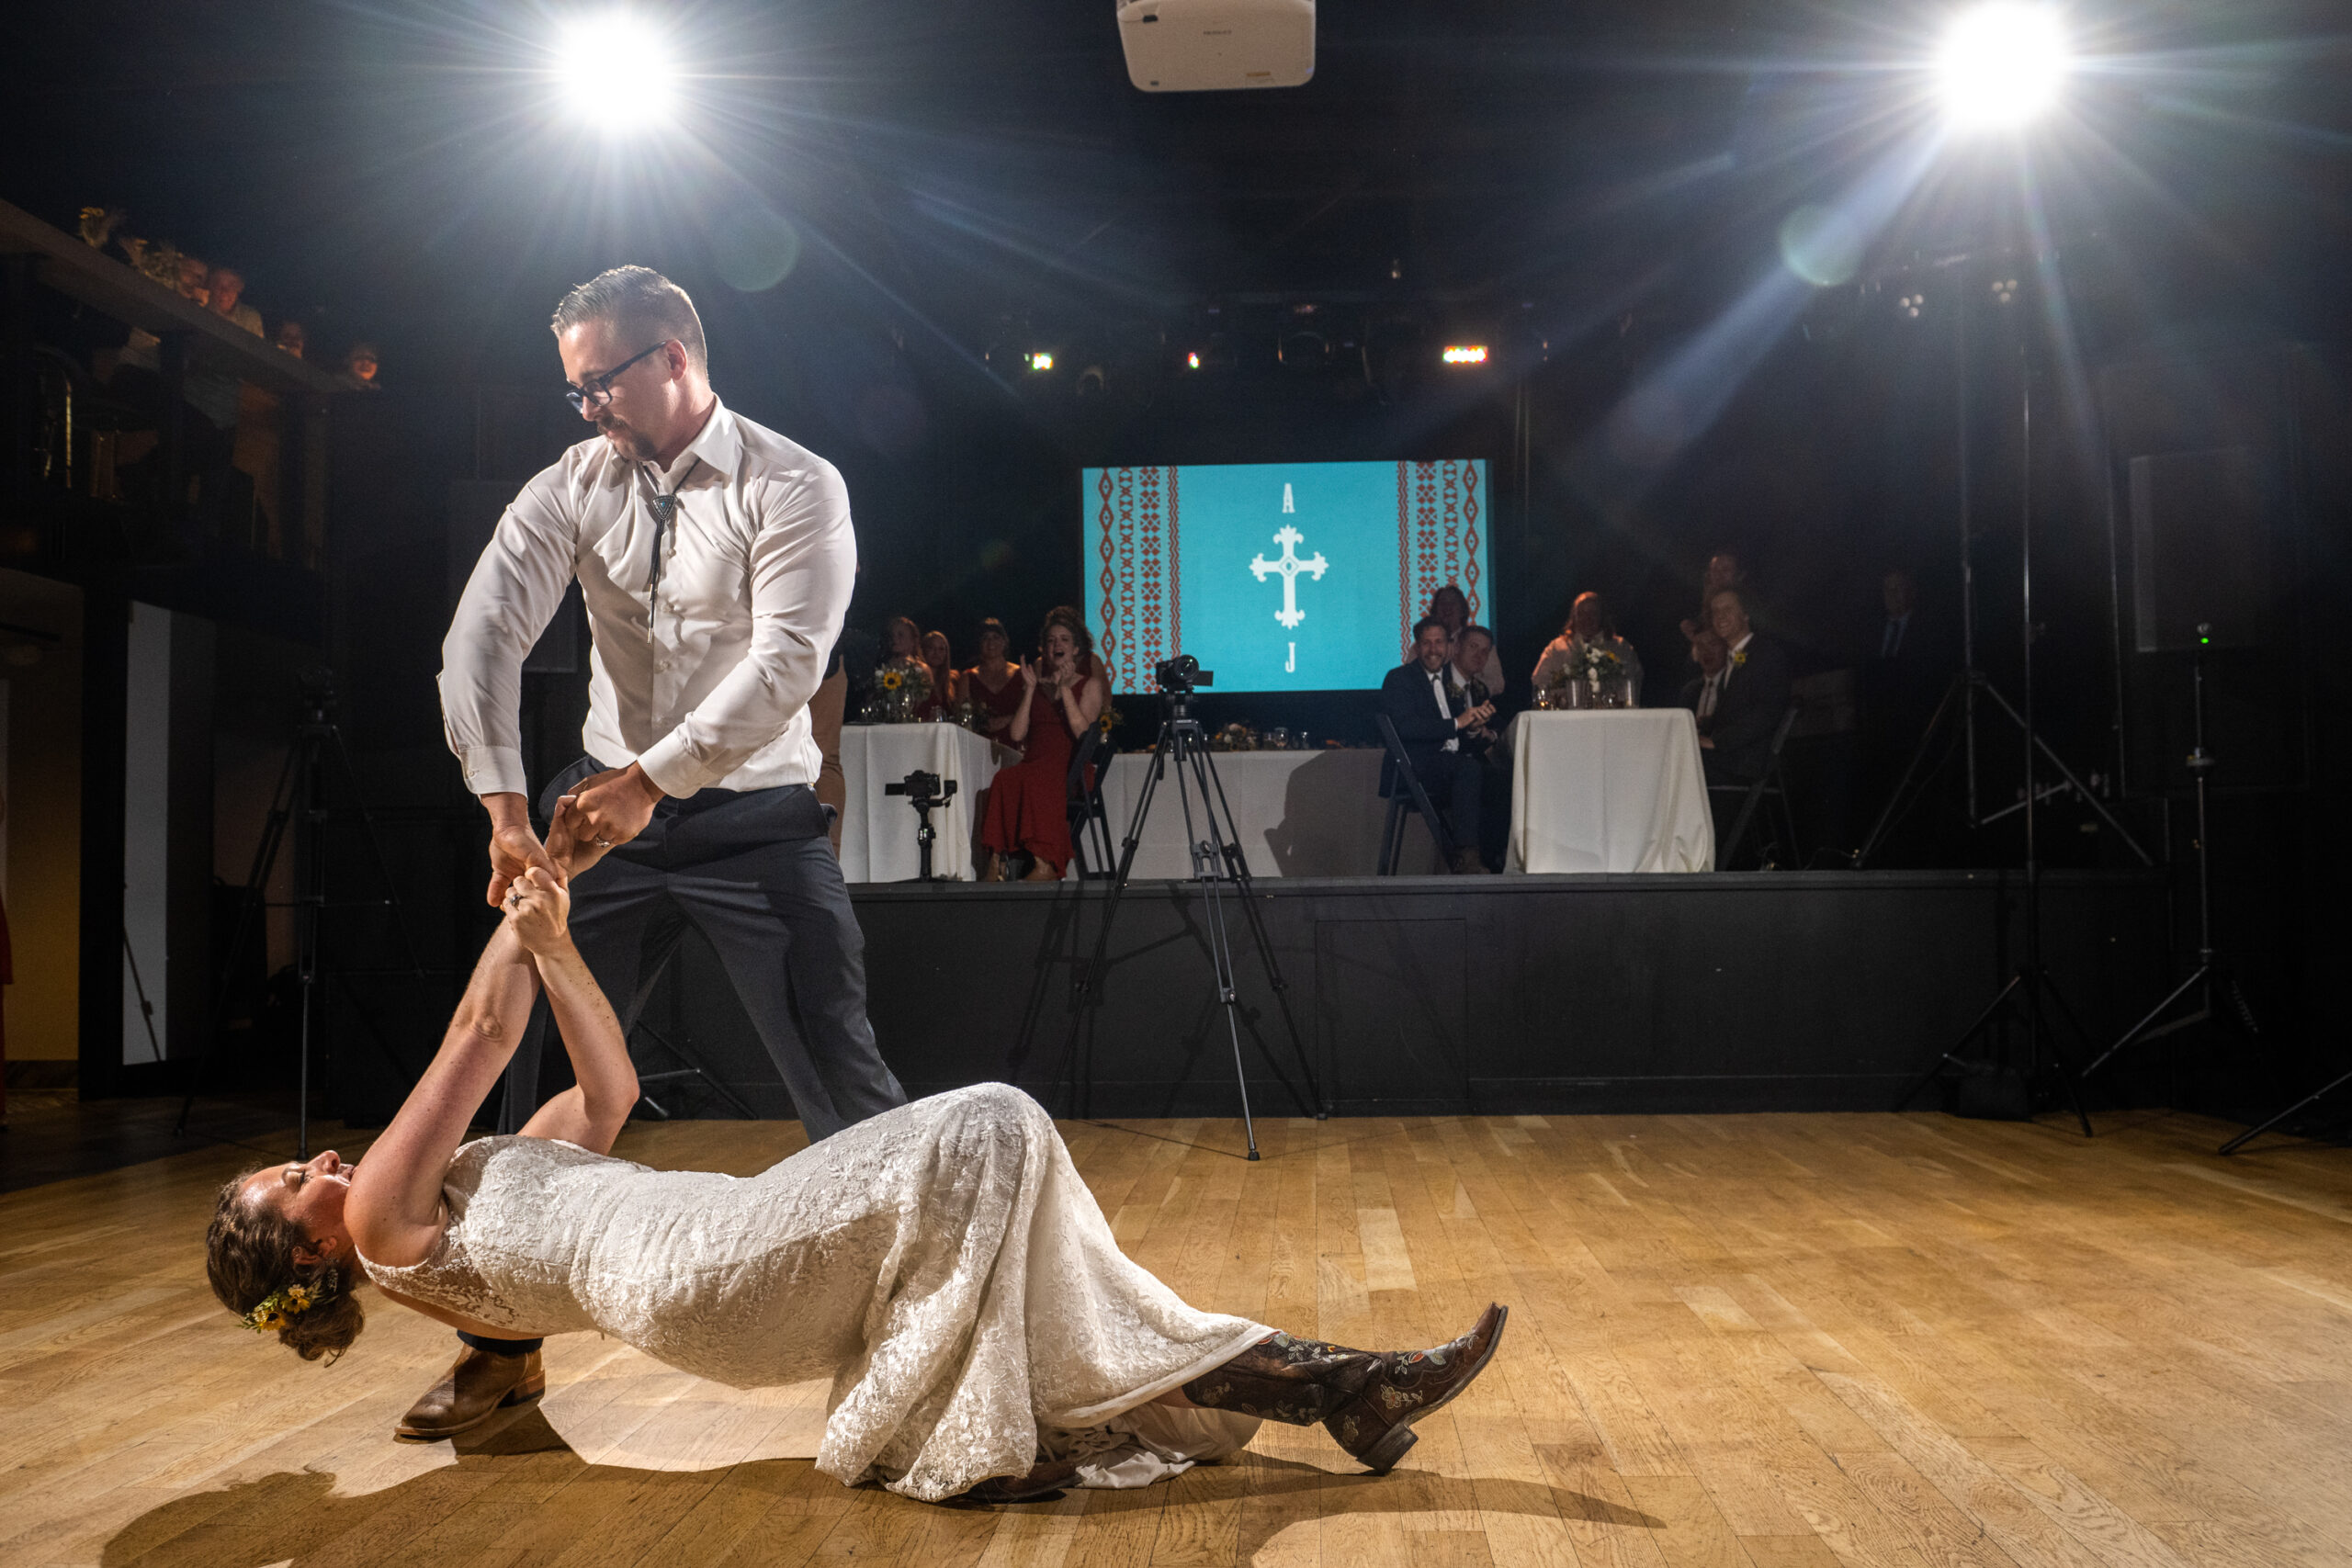 A bride and groom perform their first dance during a wedding reception at the Rose Event Center in Golden, Colorado.